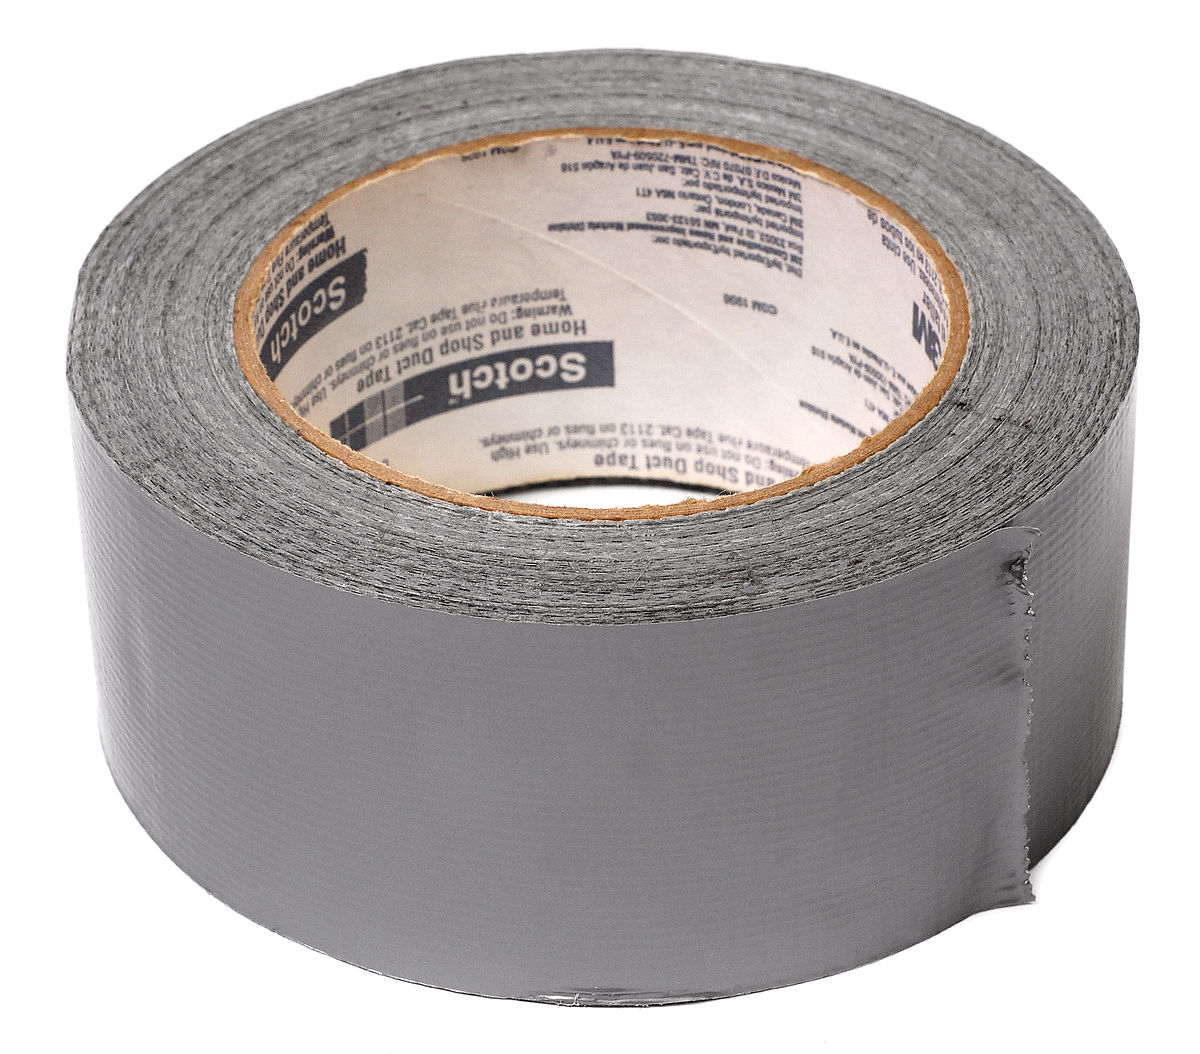 1200px-Duct-tape